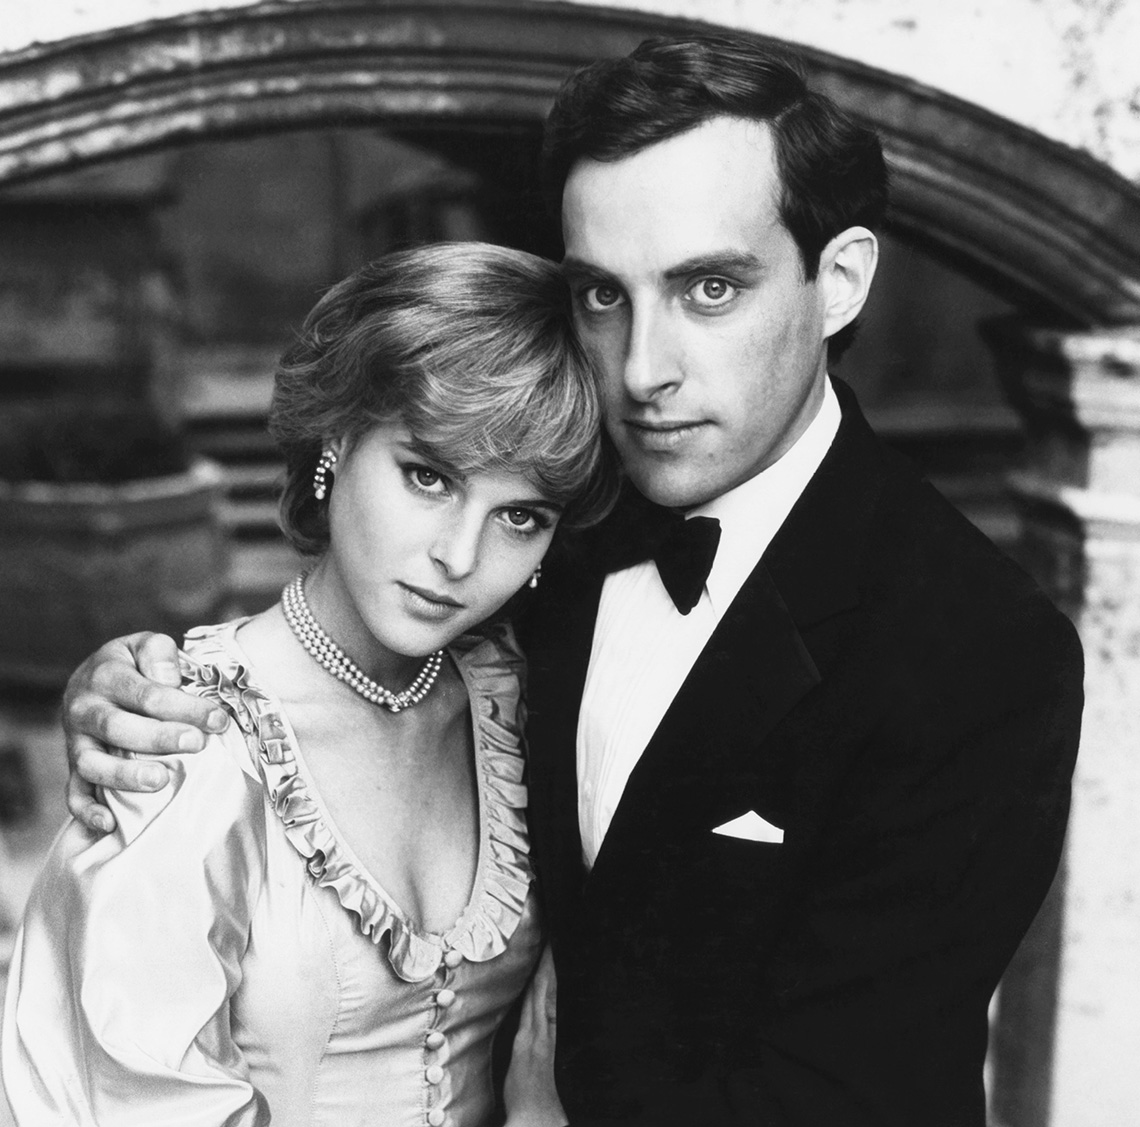 Catherine Oxenberg and Christopher Baines in The Royal Romance of Charles and Diana